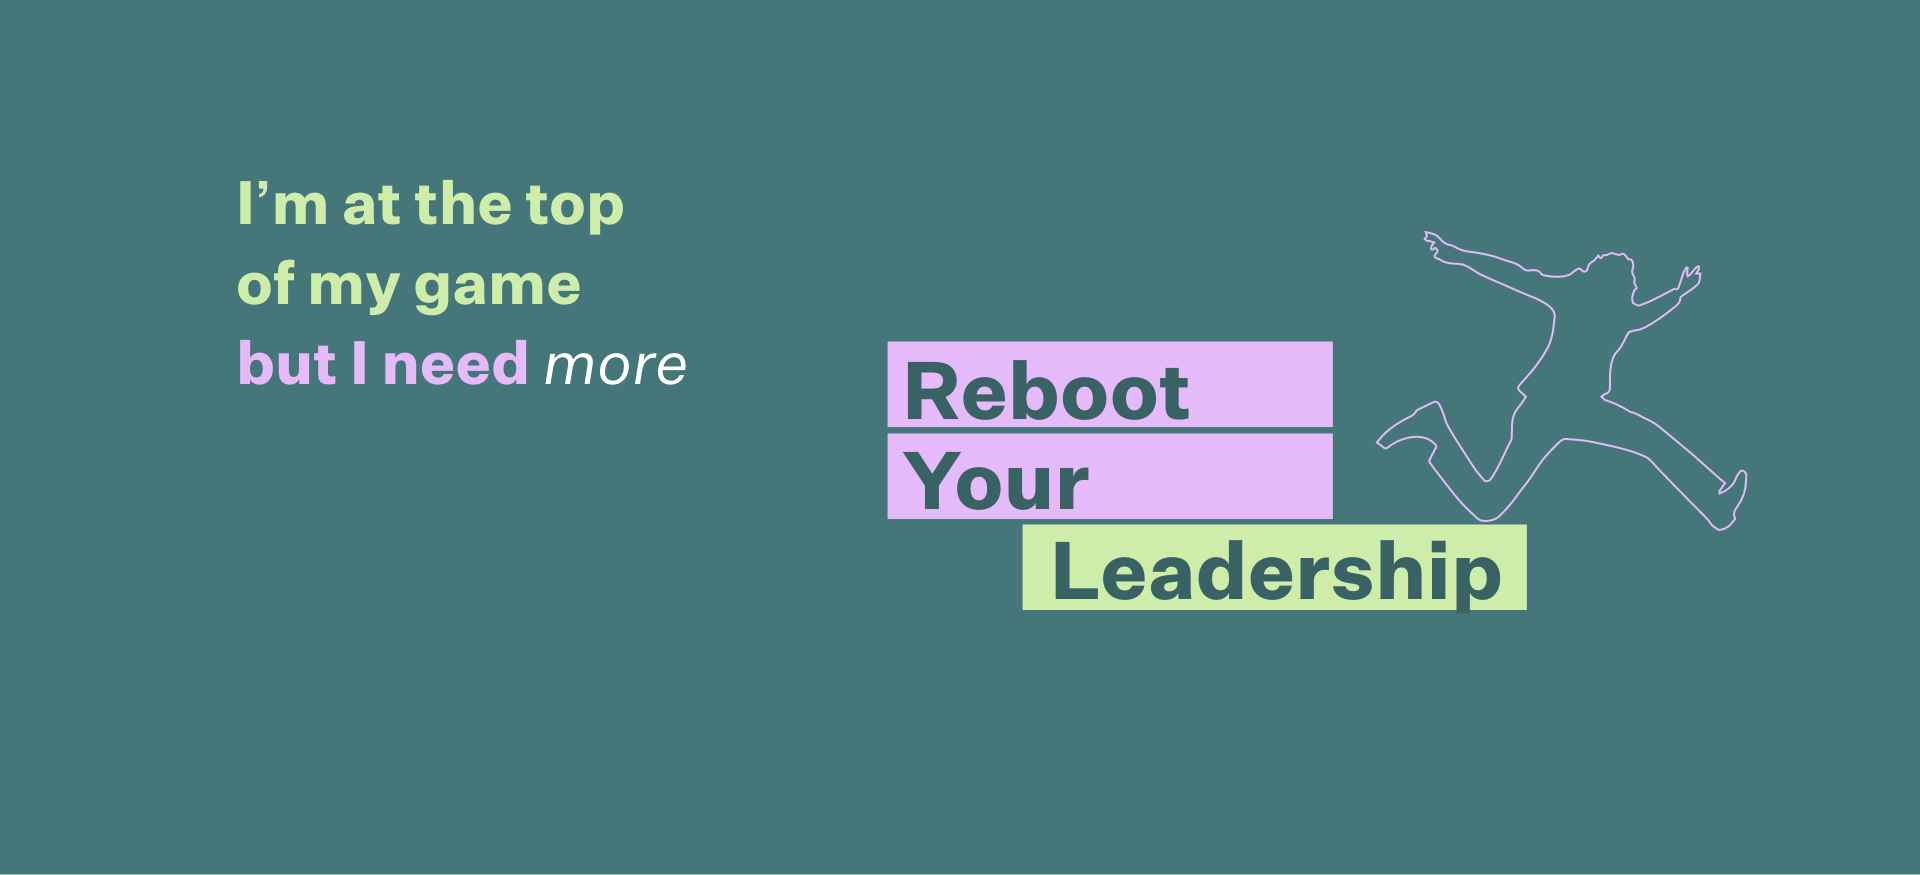 I'm at the top of my game but I need more Reboot Your Leadership